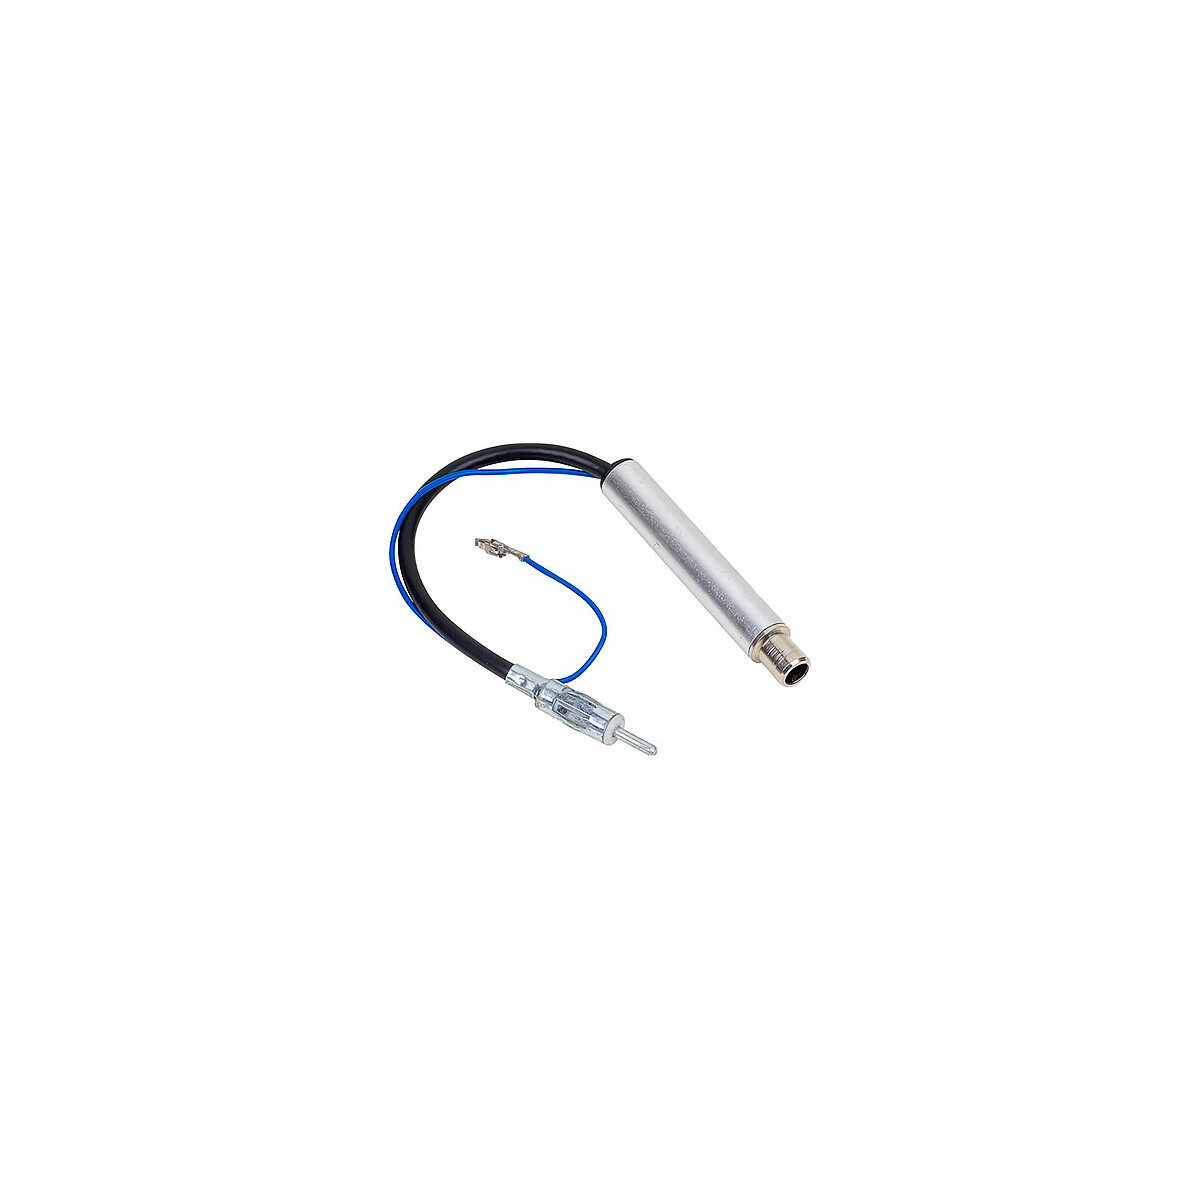 https://audioproject.de/media/image/product/1732/lg/audioproject-a190-antennenadapter-phantomeinspeisung-iso-din-fuer-audi-seat-skoda-vw-peugeot-citroen-ford-fiat-150-ohm-autoradio.jpg